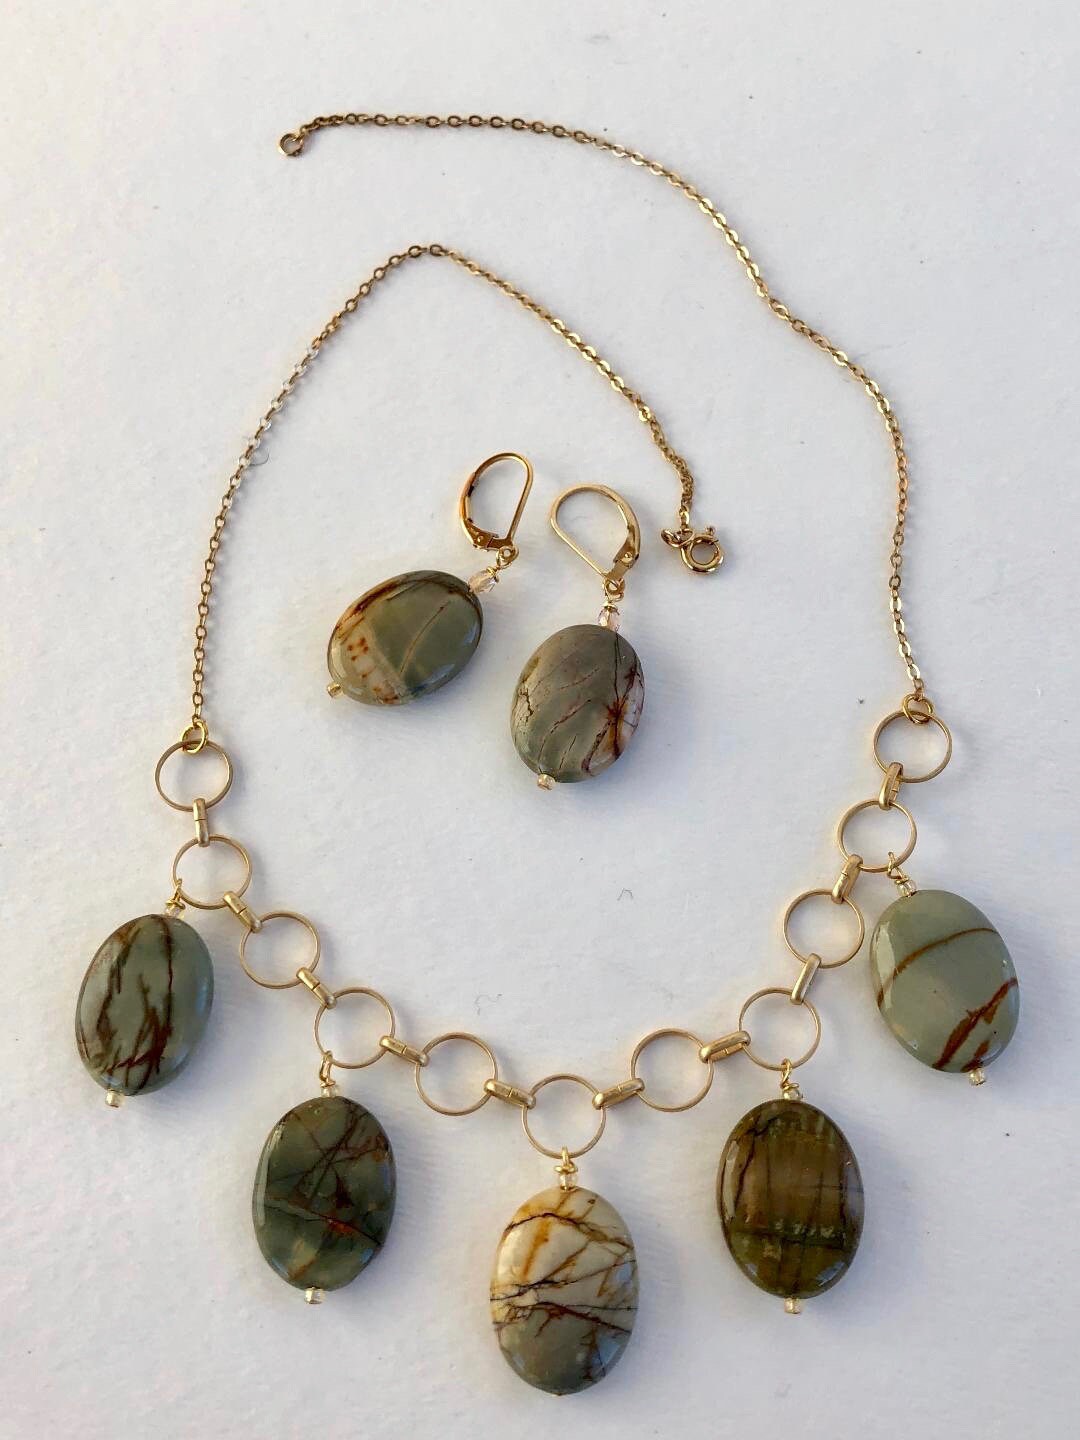 Jasper necklace.   Grounding and centering. Gemstones drop from gold metal circles, stung on a gold filled chain.